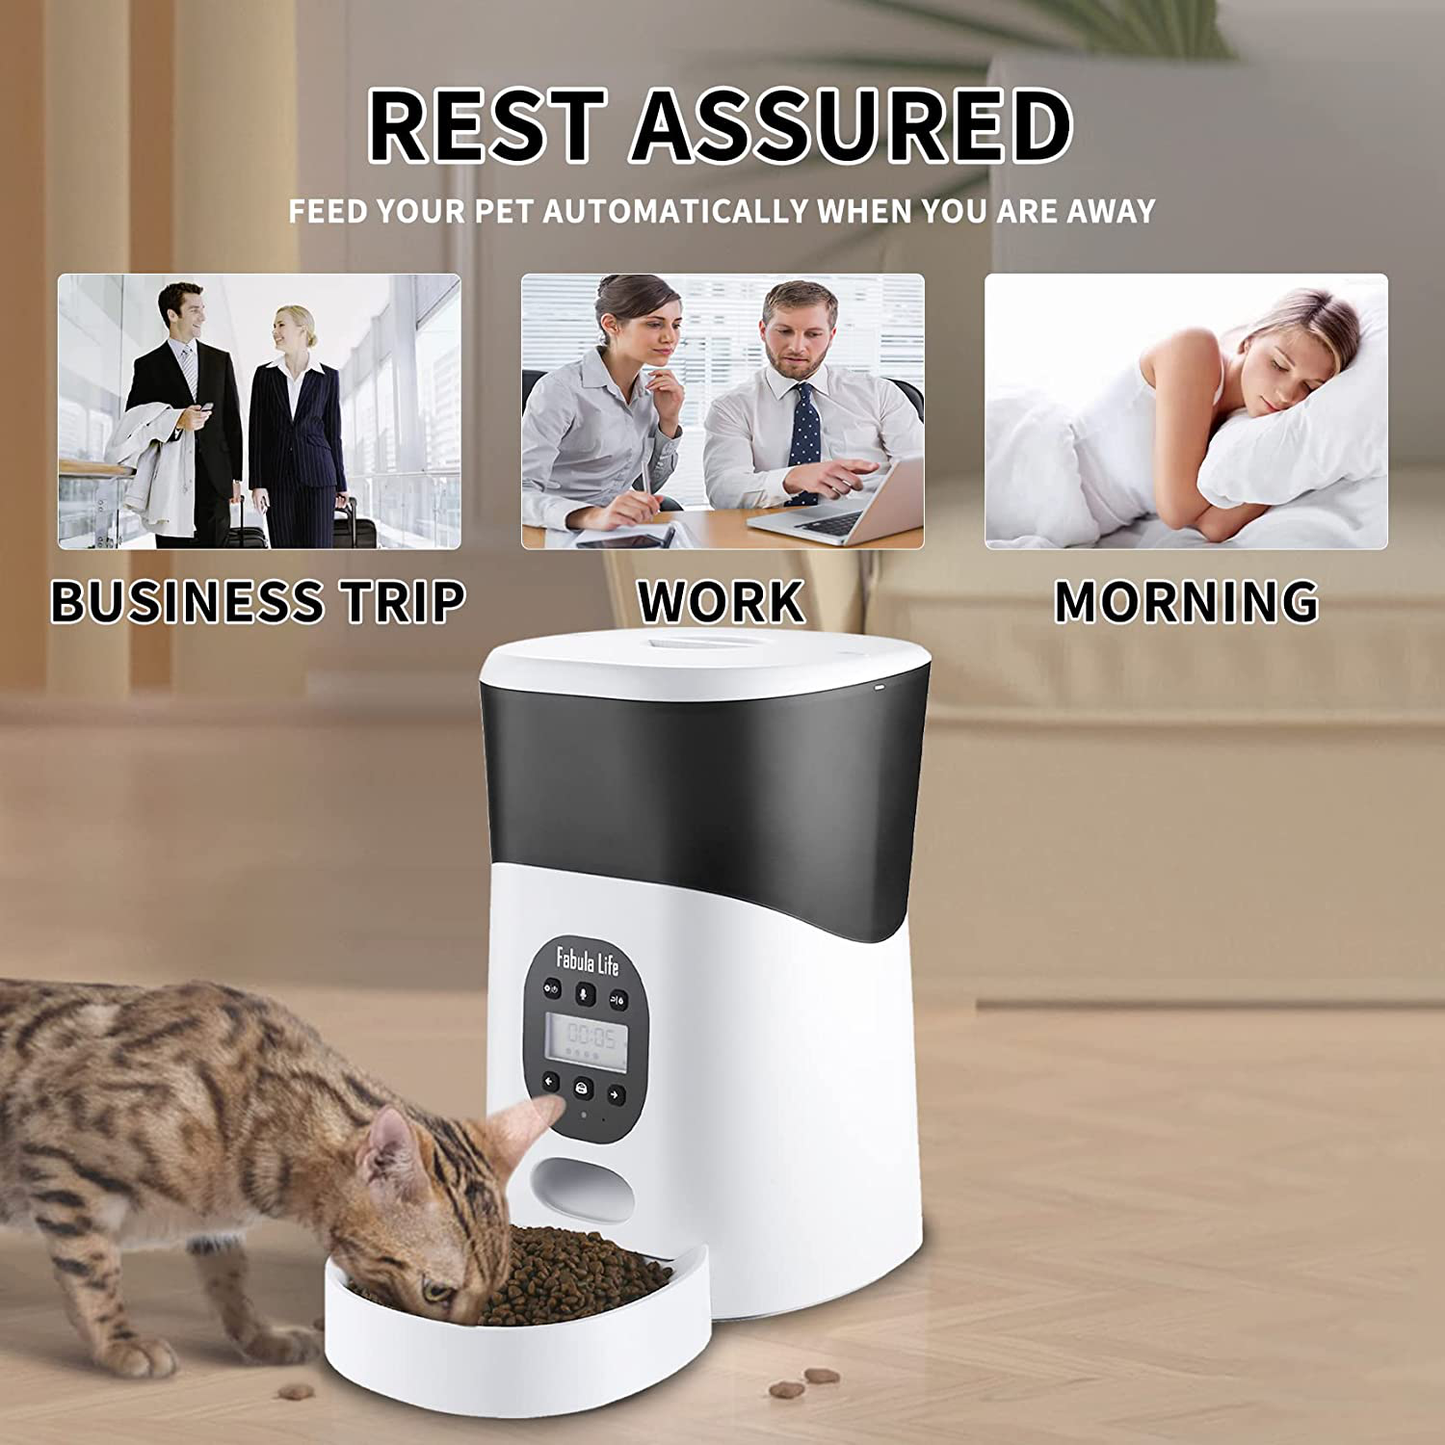 Fabula Life Automatic Cat Feeder, 5L Pet Dry Food Dispenser with Buckle Lock Lid, Programmable Control 1-6 Meals per Day Clog-Free Design Timed Pet Feeder, Dual Power Supply and 10S Voice Recorder